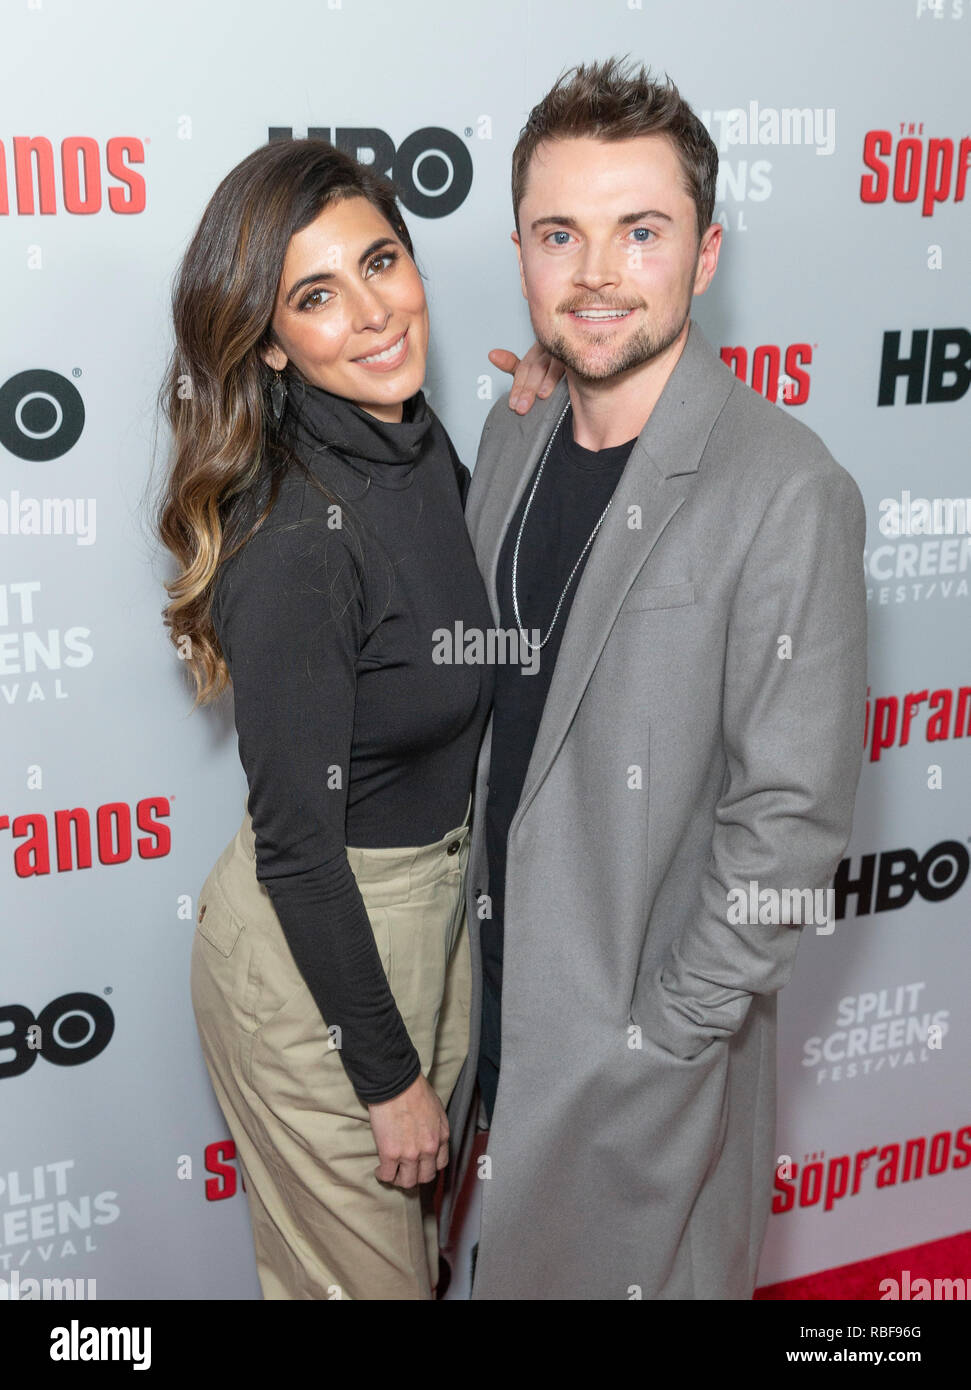 New York, NY - January 9, 2019: Jamie-Lynn Sigler and Robert Iler attend The Sopranos 20th Anniversary screening and discussion at SVA Theater Stock Photo